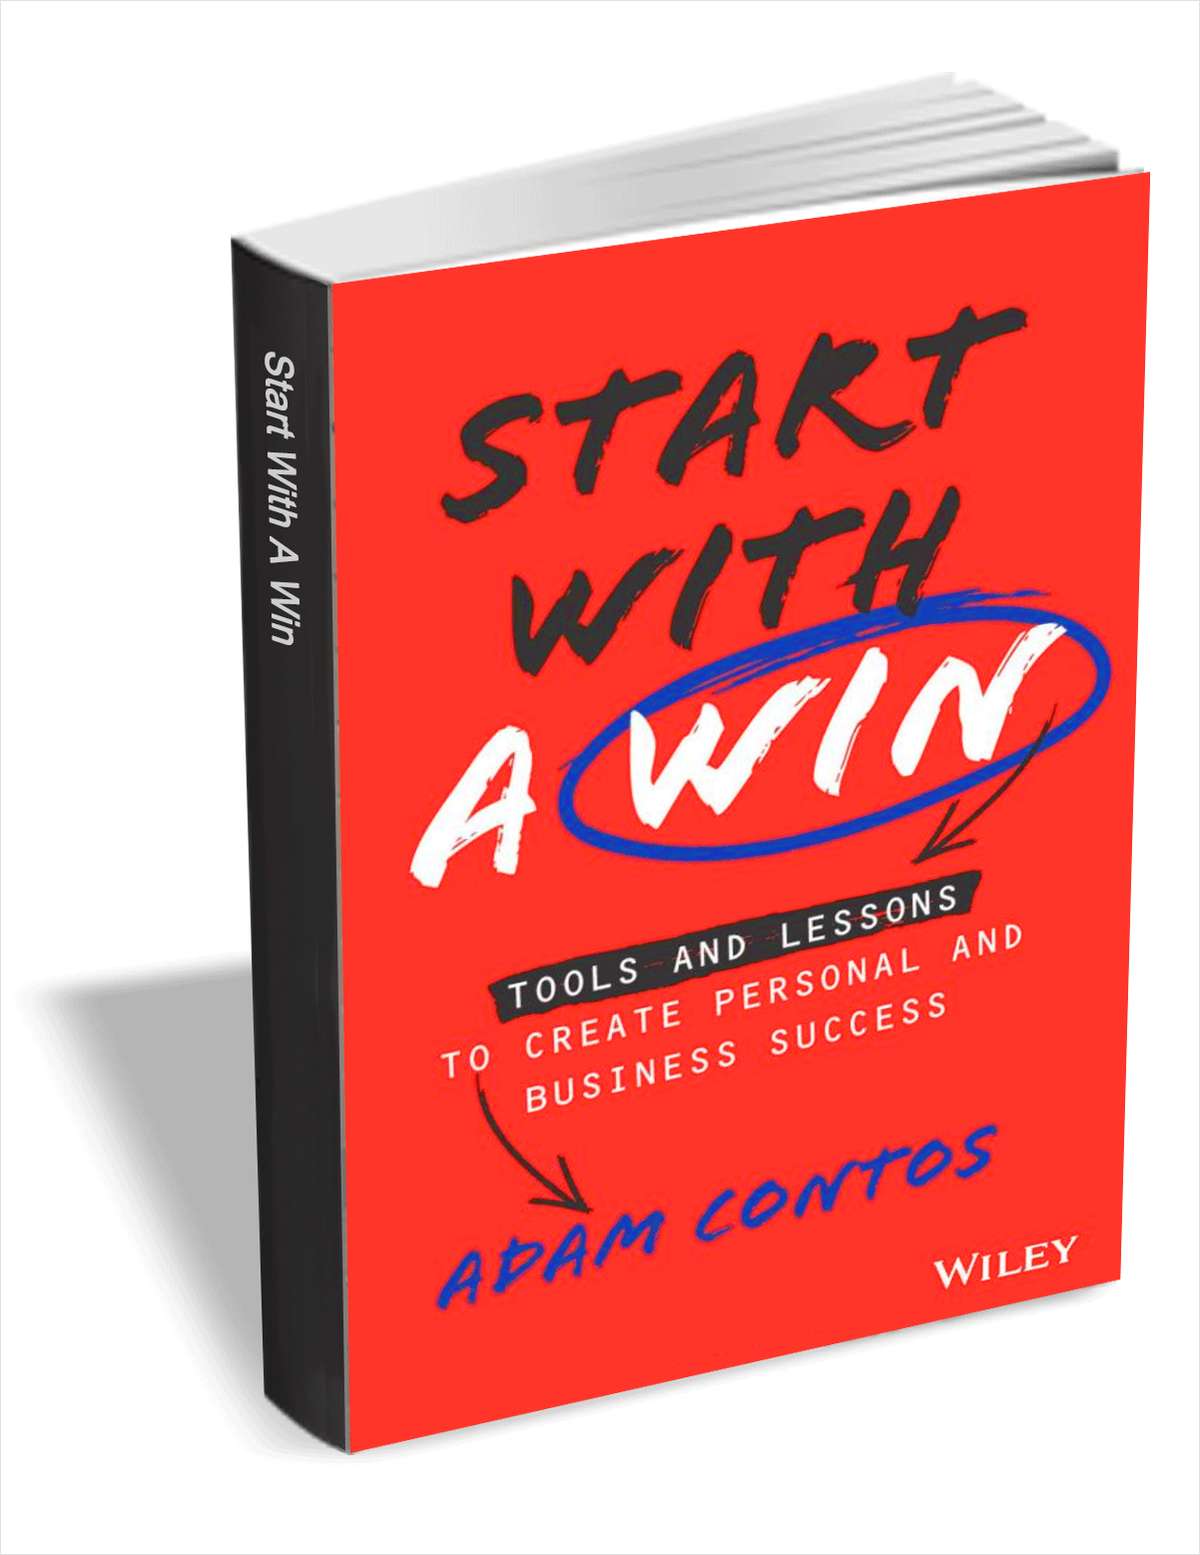 [betanews] Get 'Start With a Win: Tools and Lessons to Create Personal and Business Success' FREE